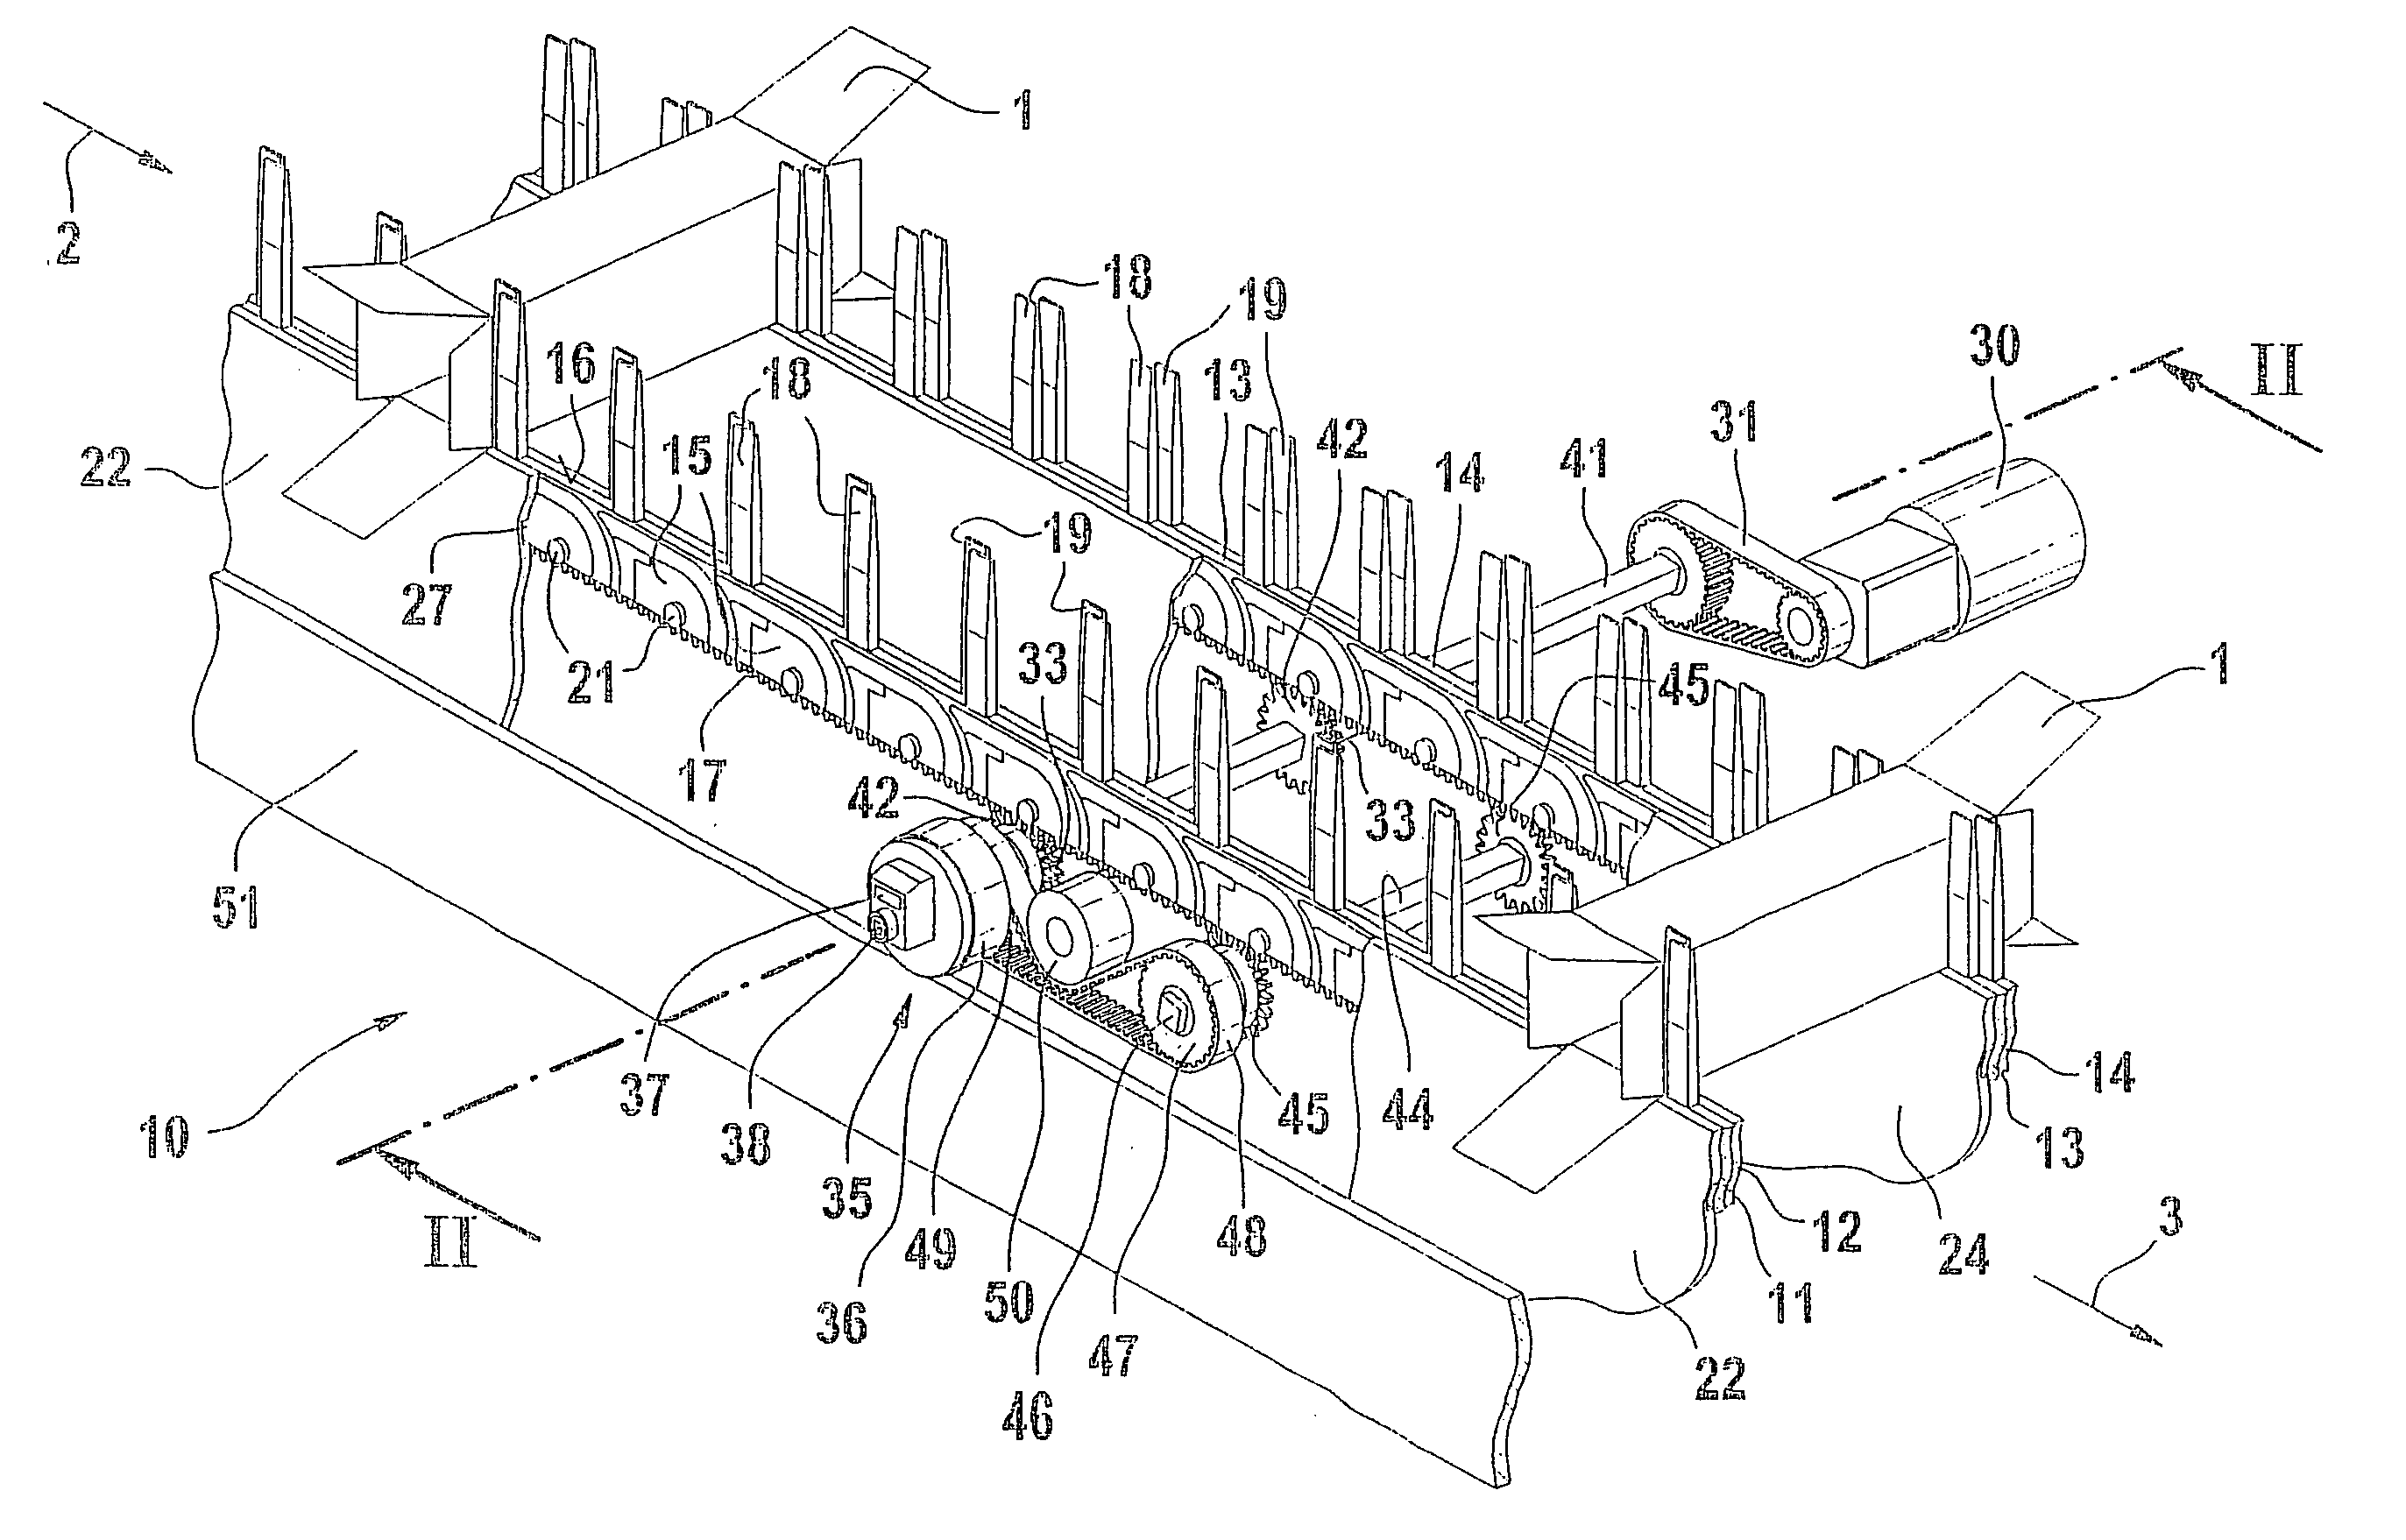 Transport device for objects in packaging machines